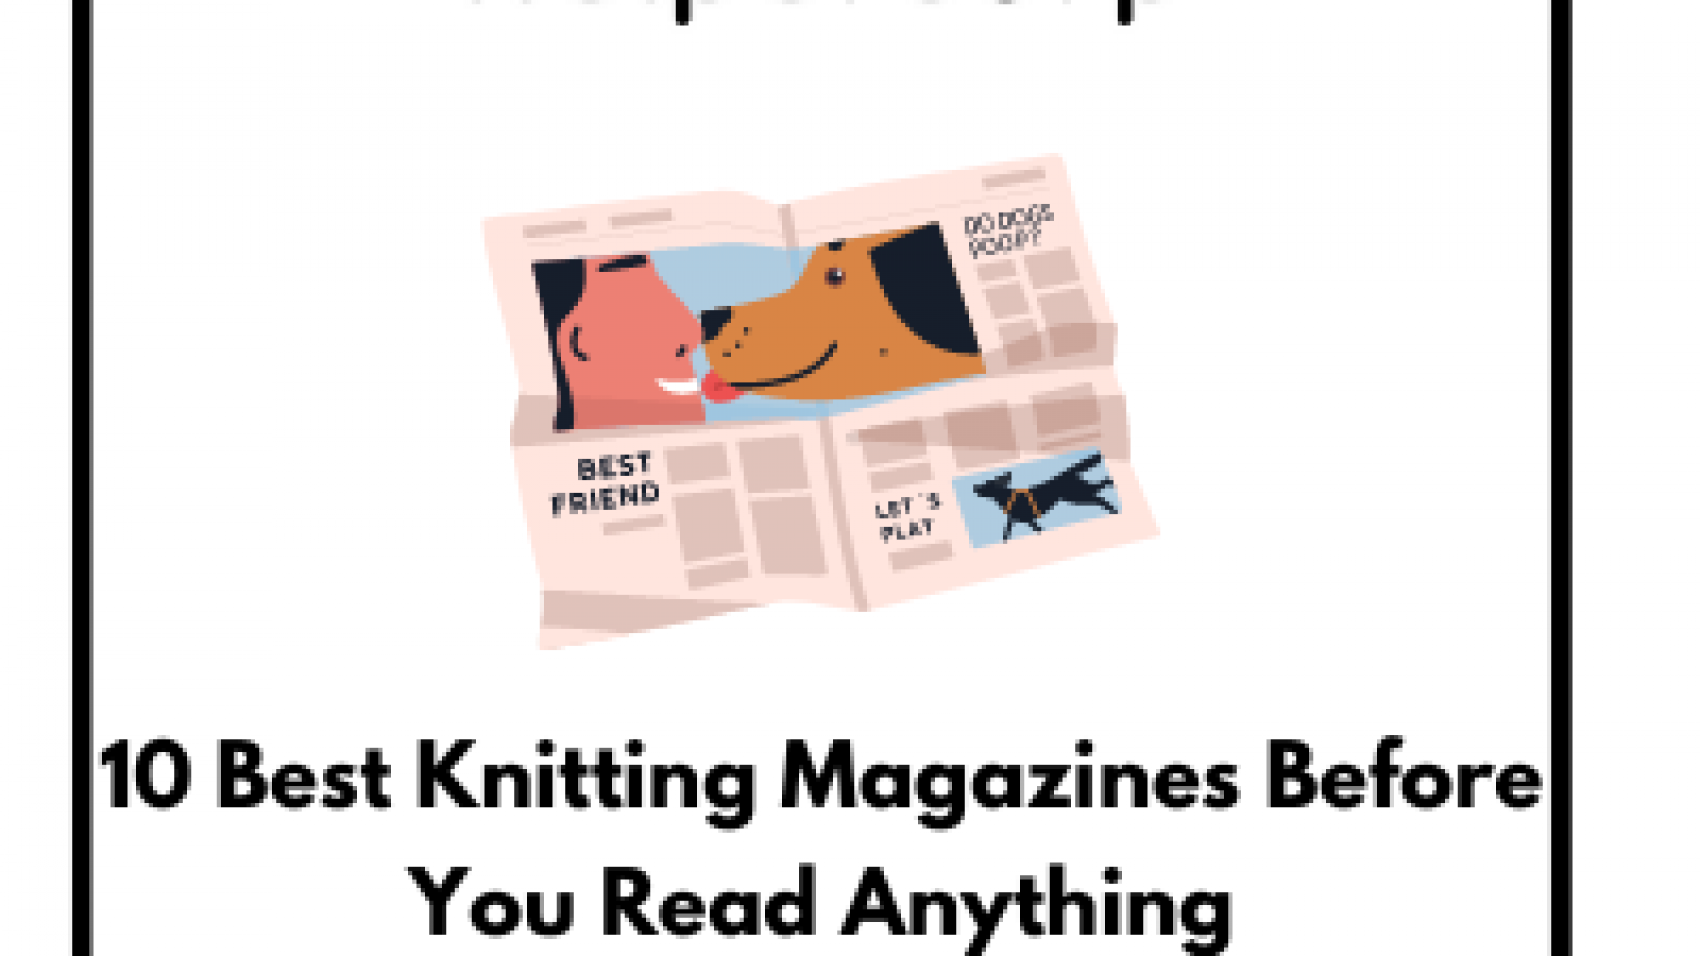 10-Best-Knitting-Magazines-Before-You-Read-Anything.